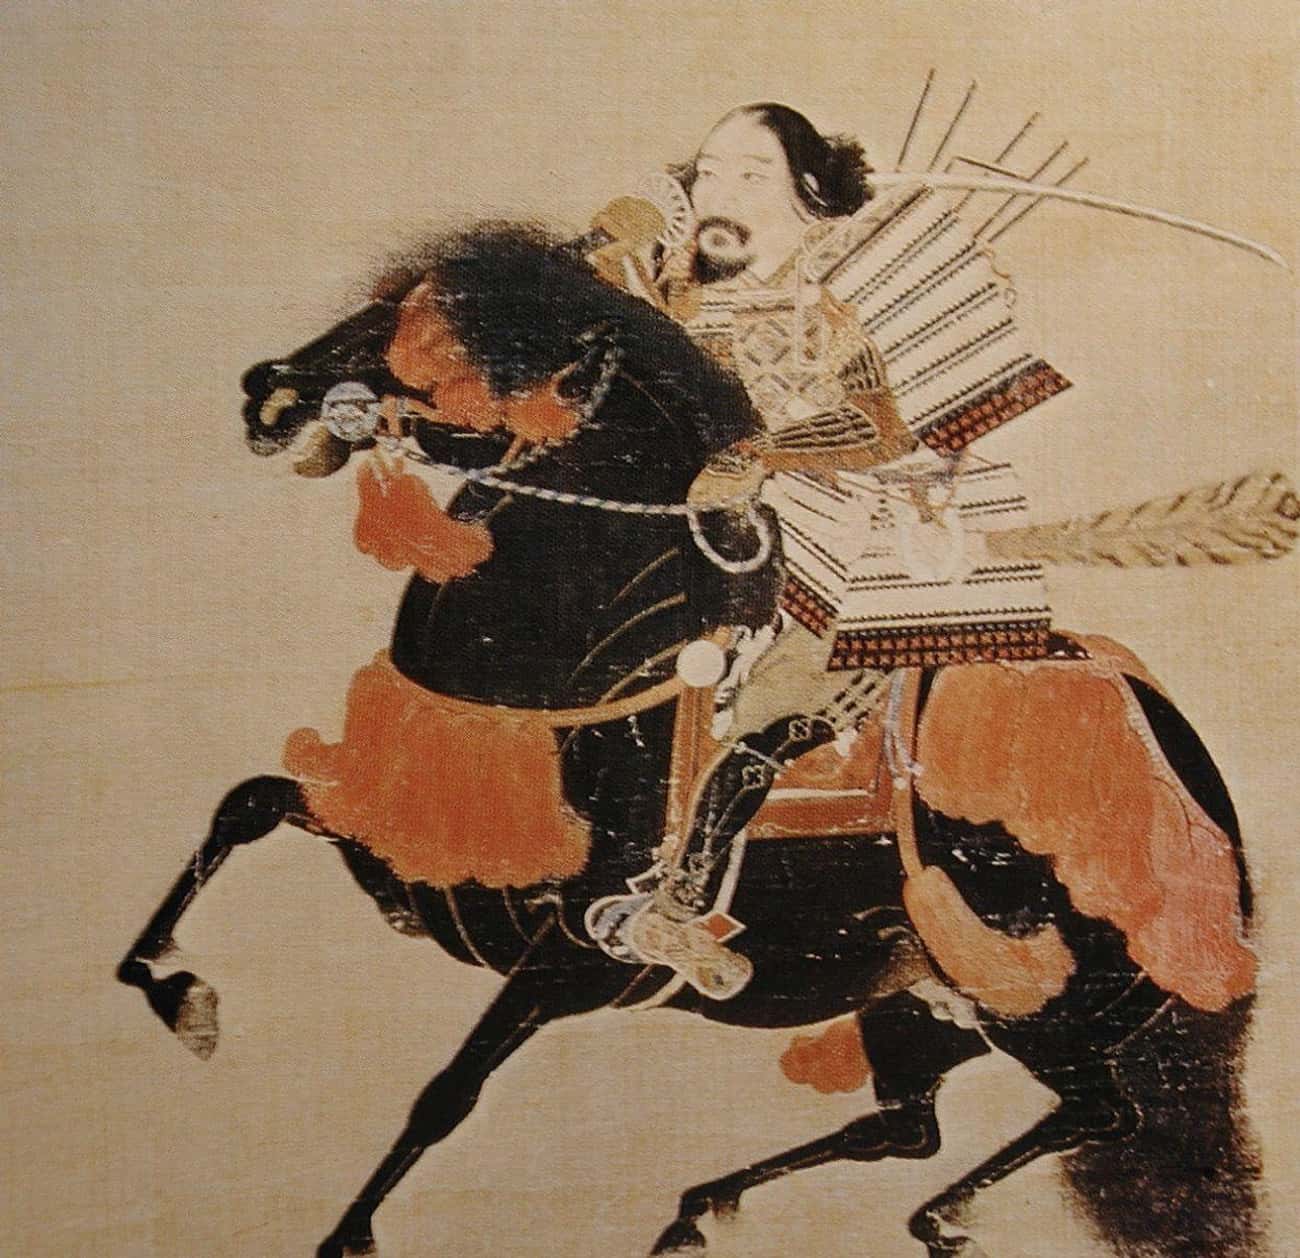 Ashikaga Takauji Was Sent To Crush A Revolt But He Switched Sides And Became A Shogun